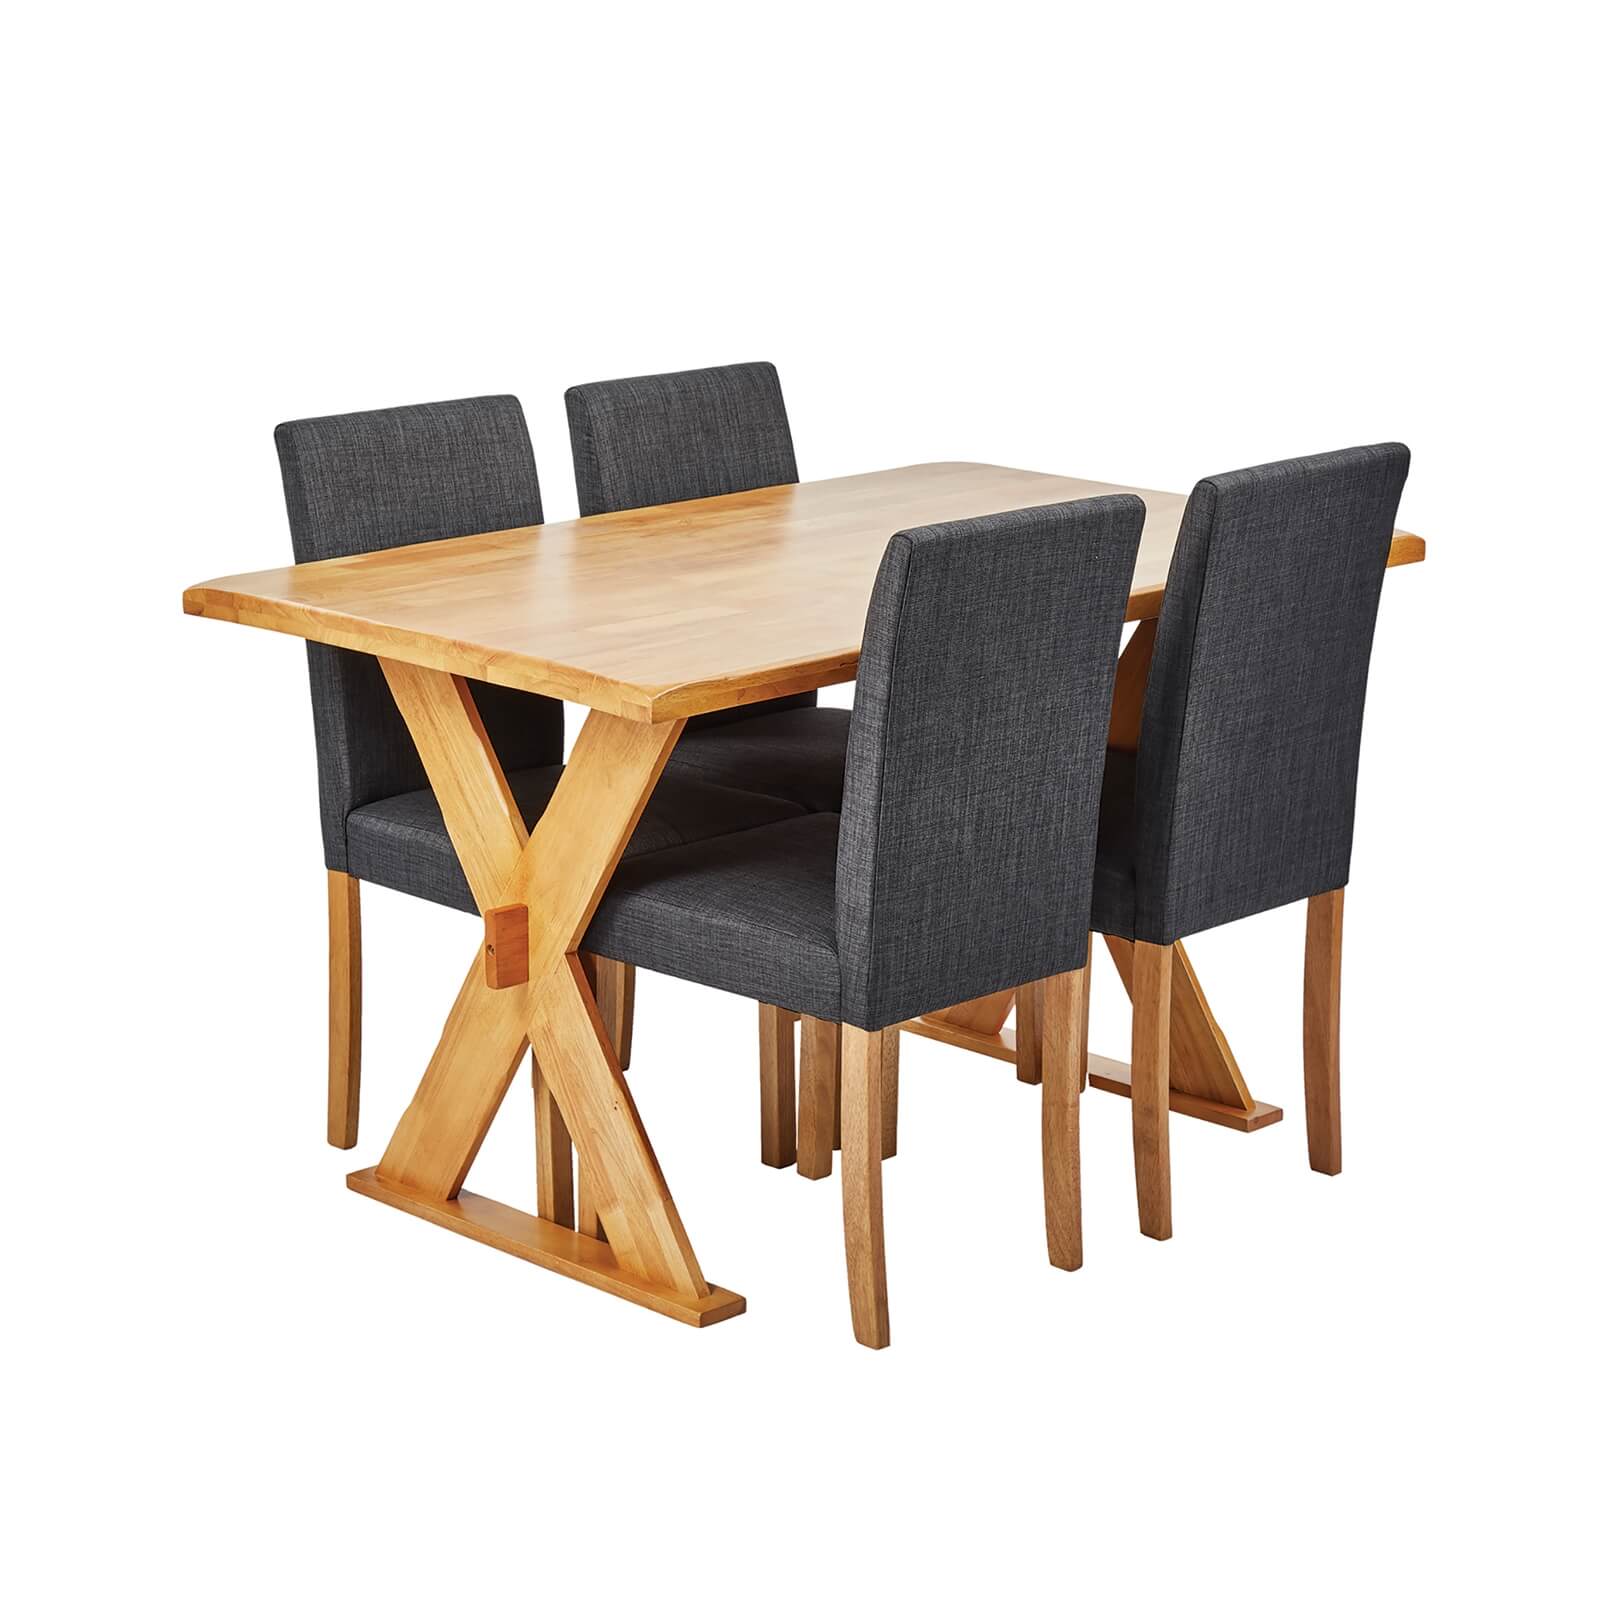 Seville 4 Seater Dining Set - Anna Dining Chairs - Grey